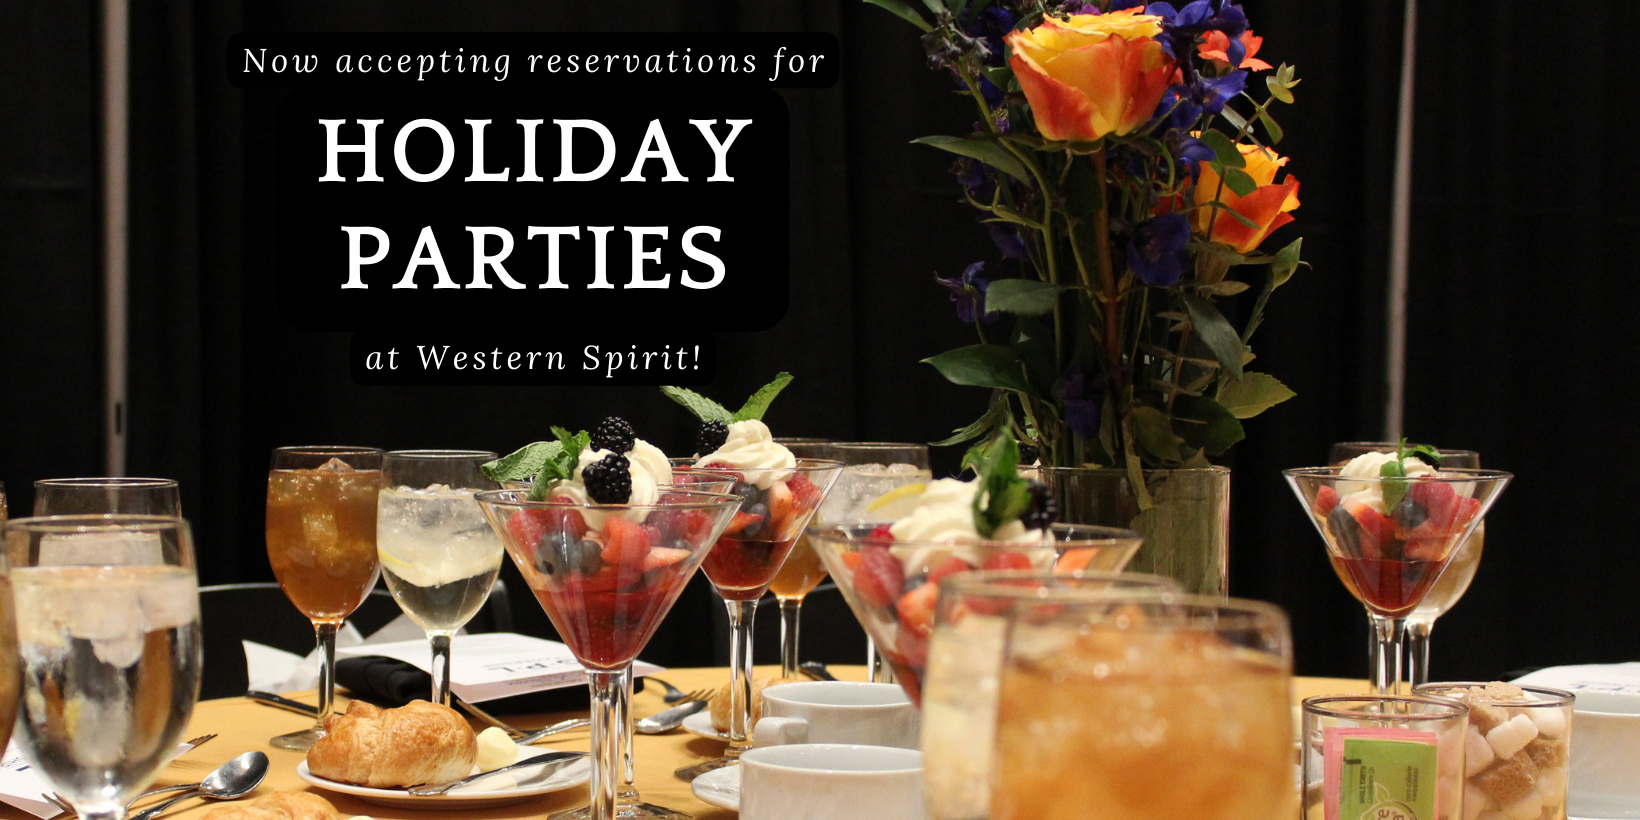 Table setting depicting western spirit is now accepting reservations for holiday parties